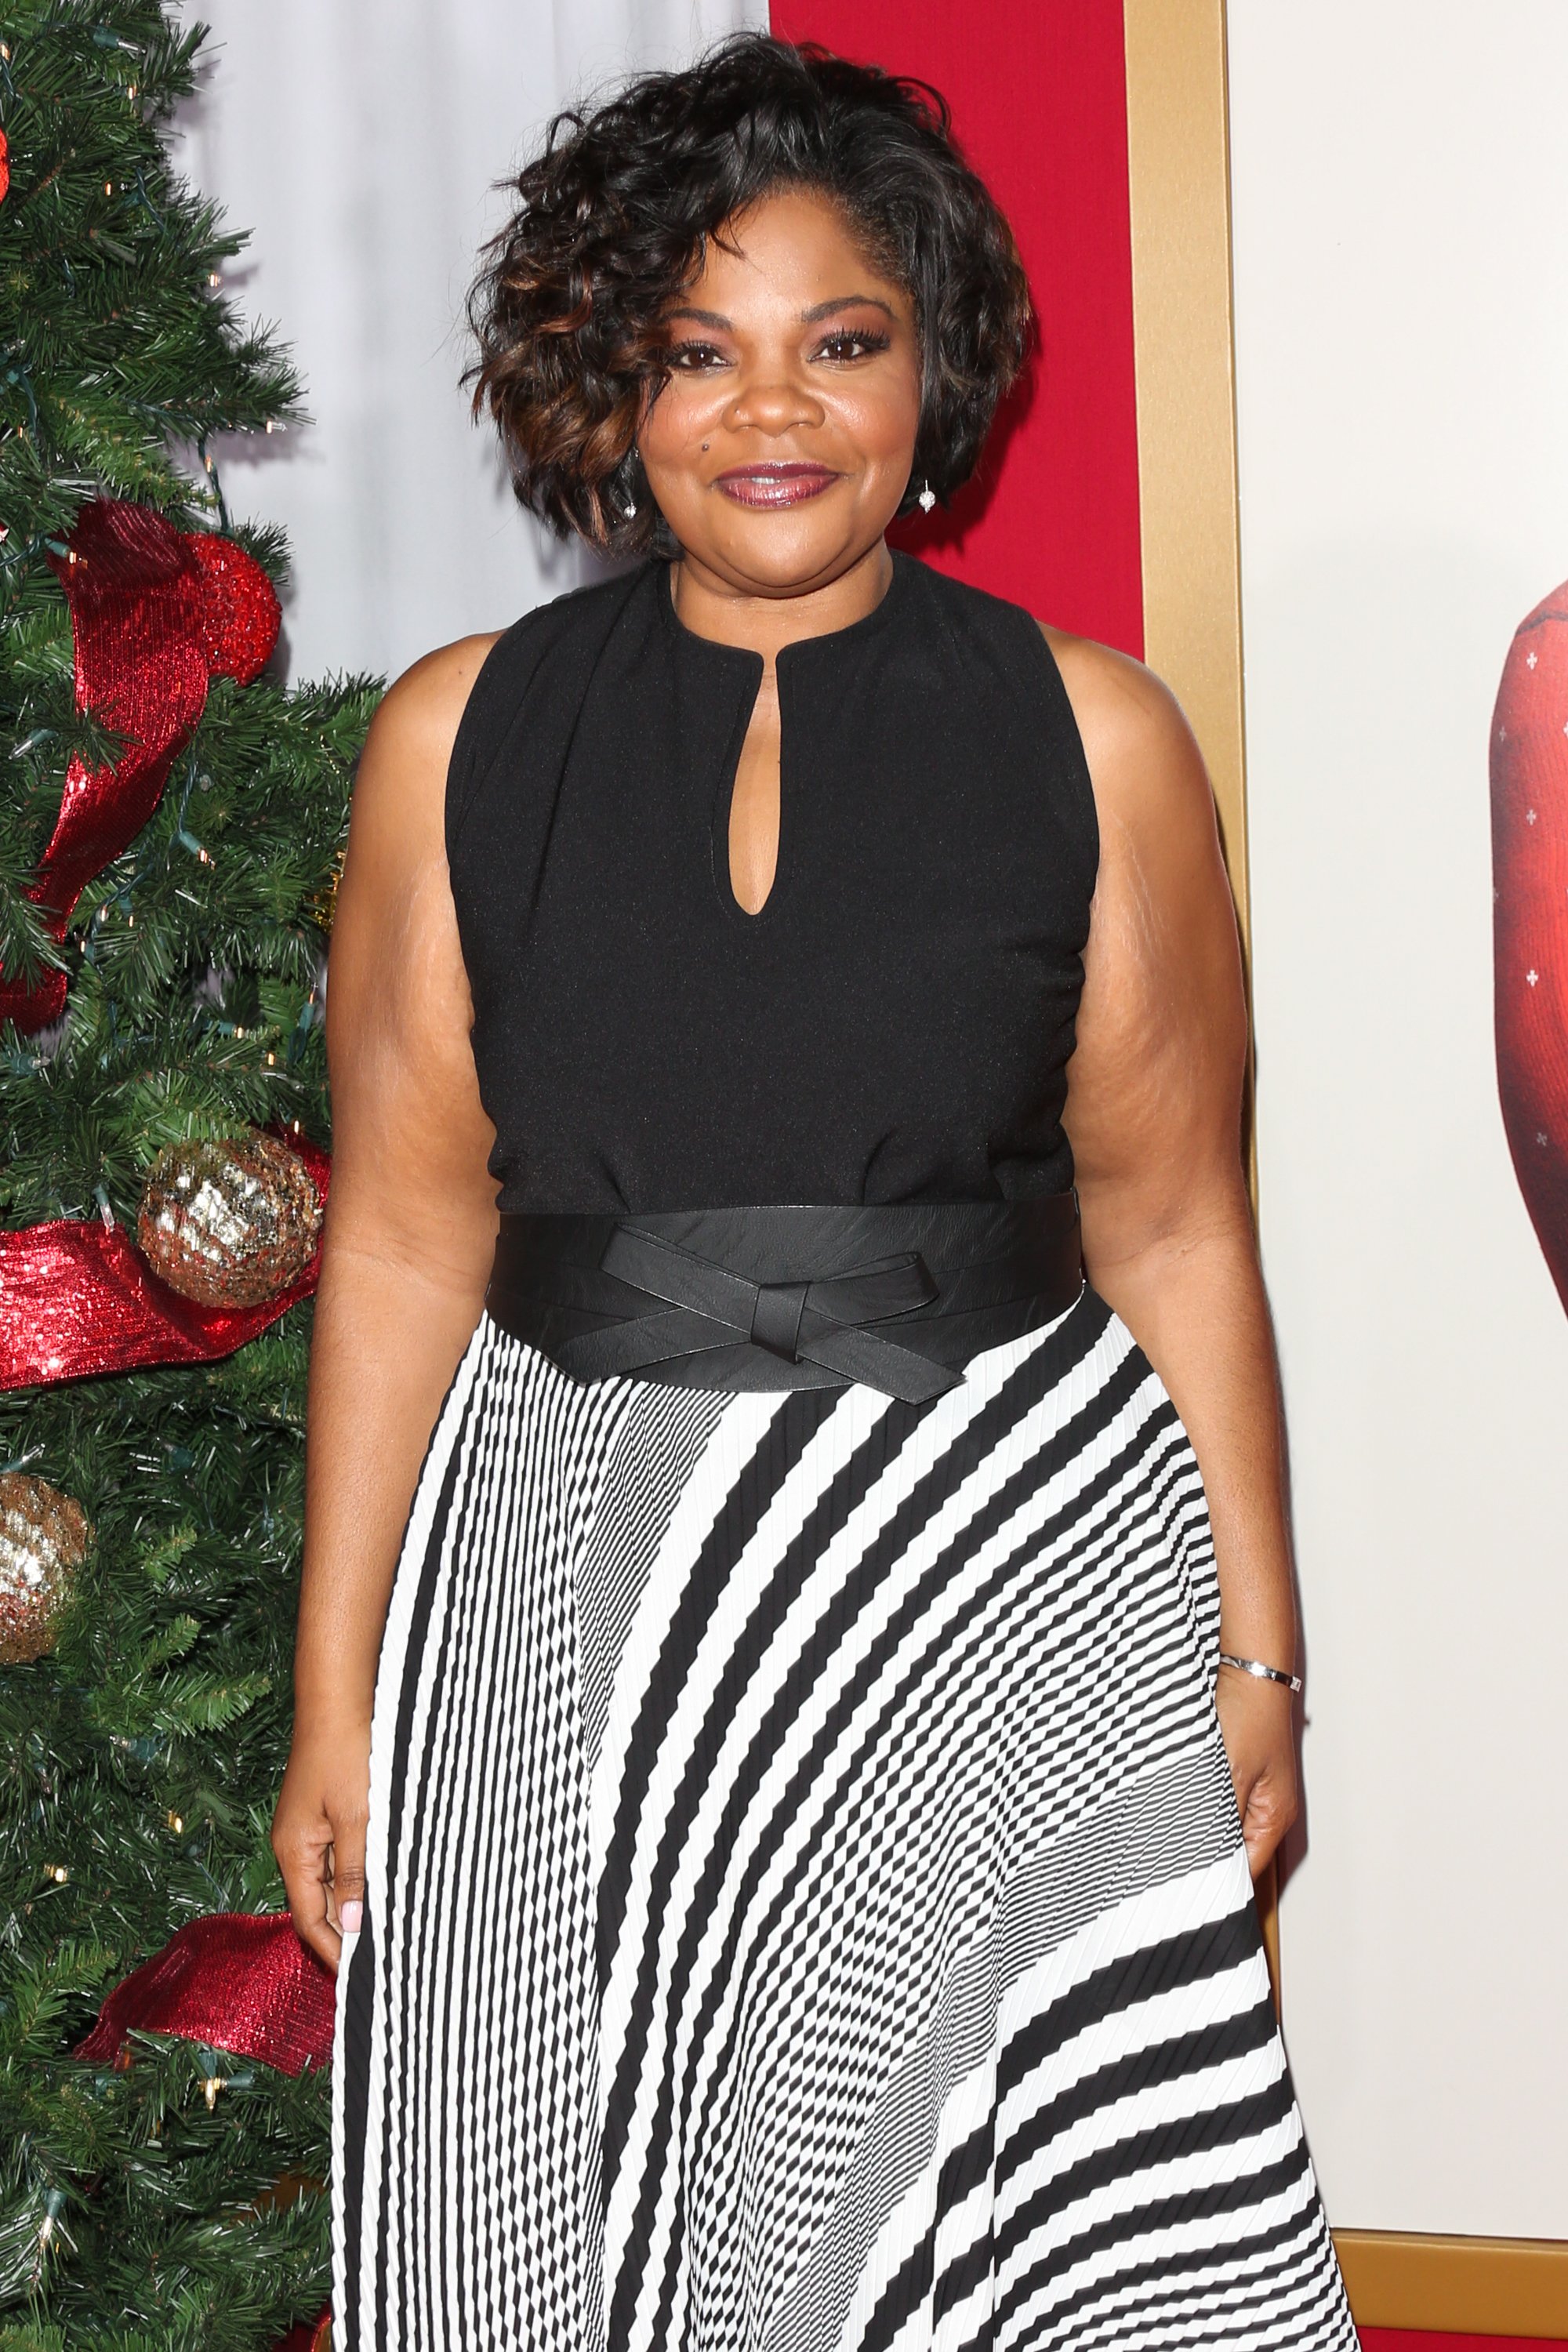 Mo'Nique at the premiere of "Almost Christmas" on November 3, 2016, in Westwood, California | Source: Getty Images